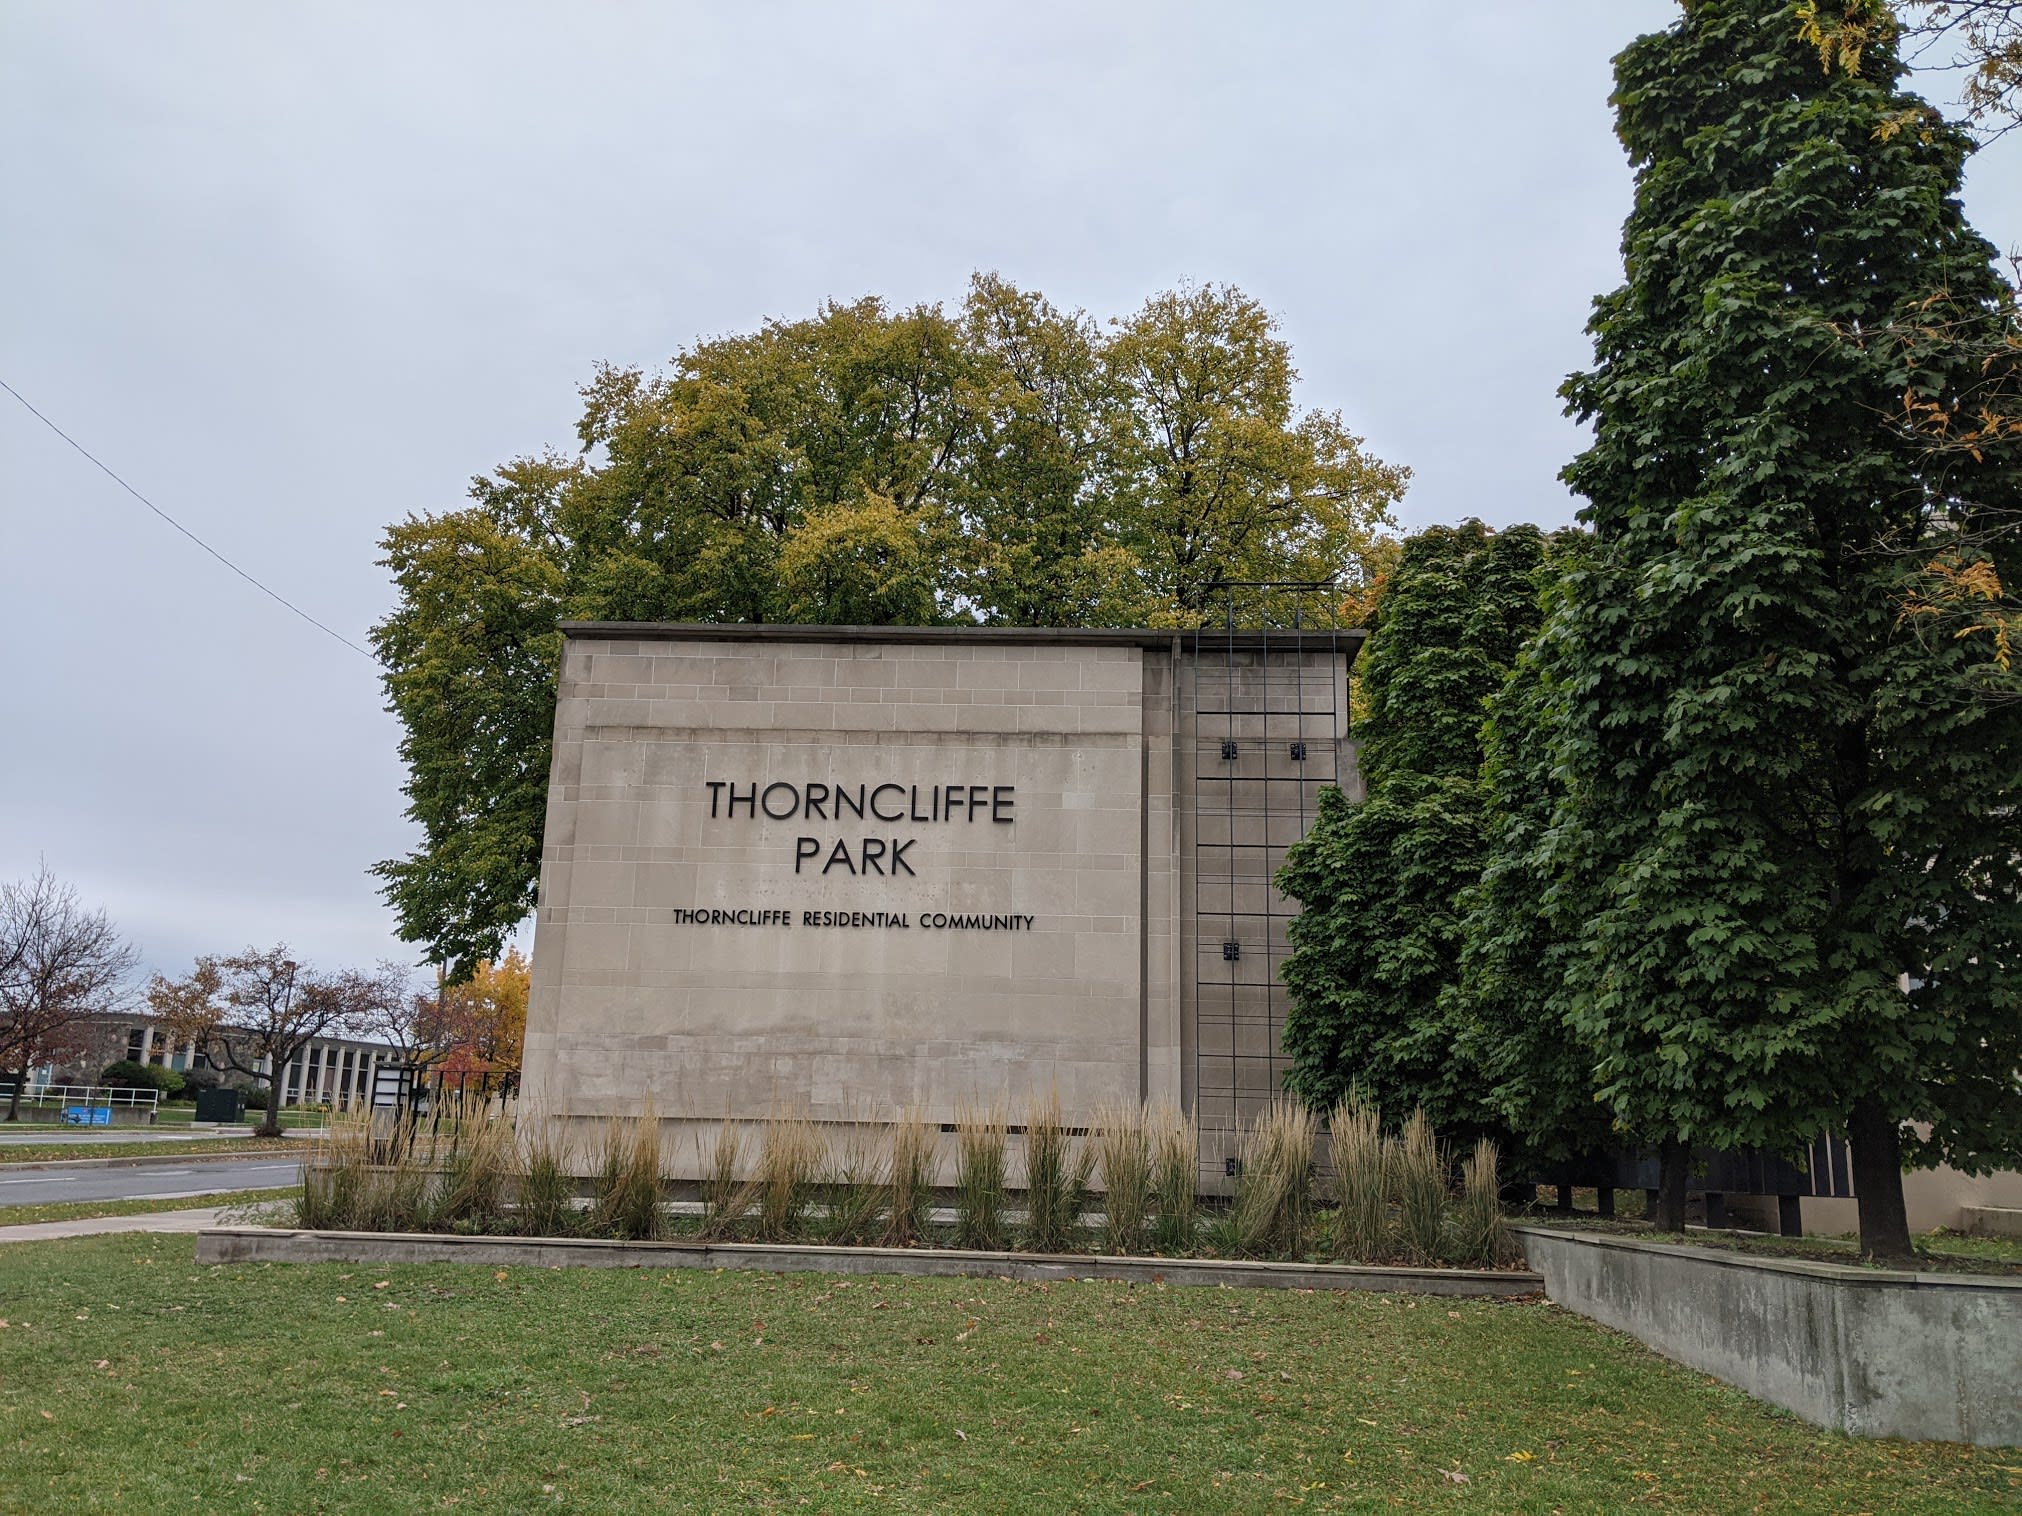 a large stone Thorncliffe Park sign